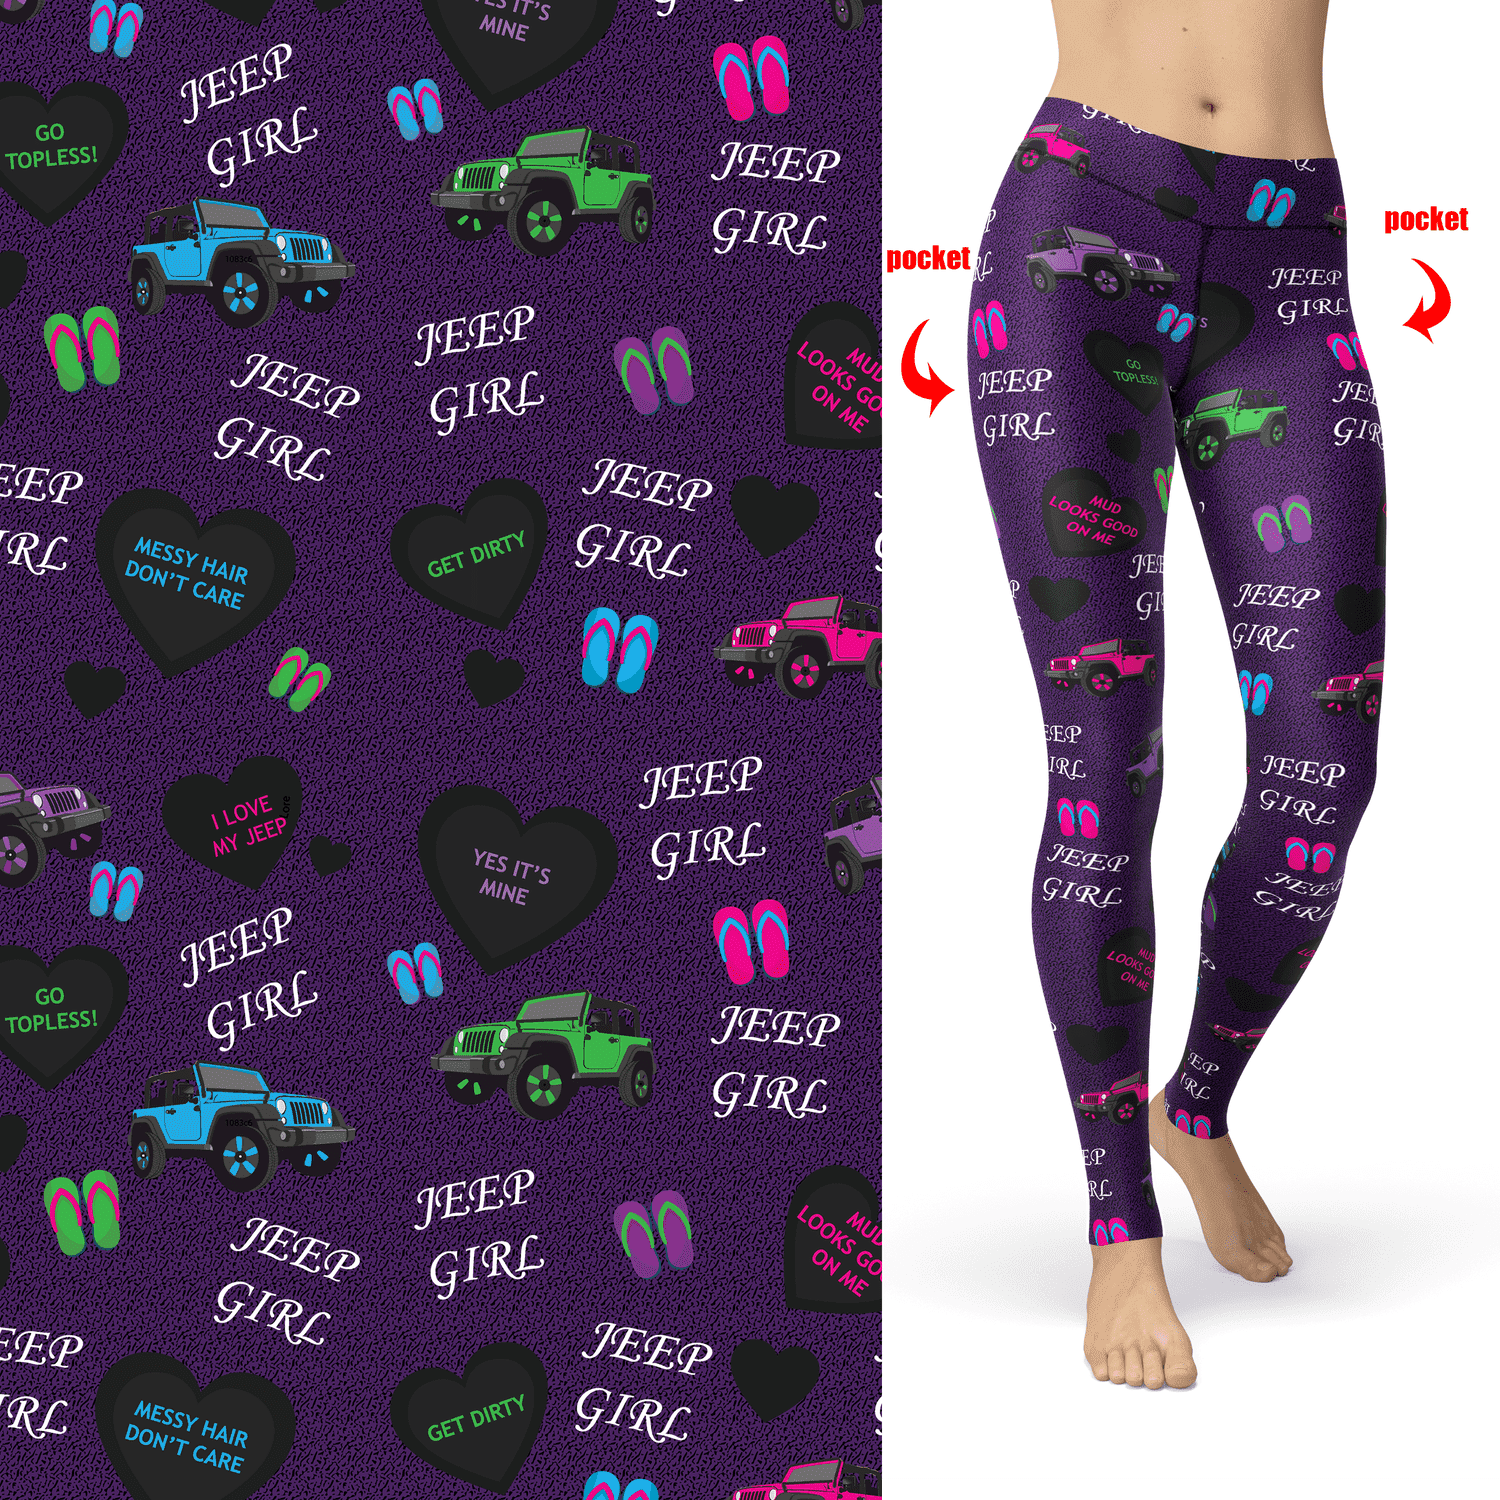 Purple Jeeper Girl Leggings with Pockets- flip flops - hearts - Go Topless - Get Dirty - Jeepers -  Purple